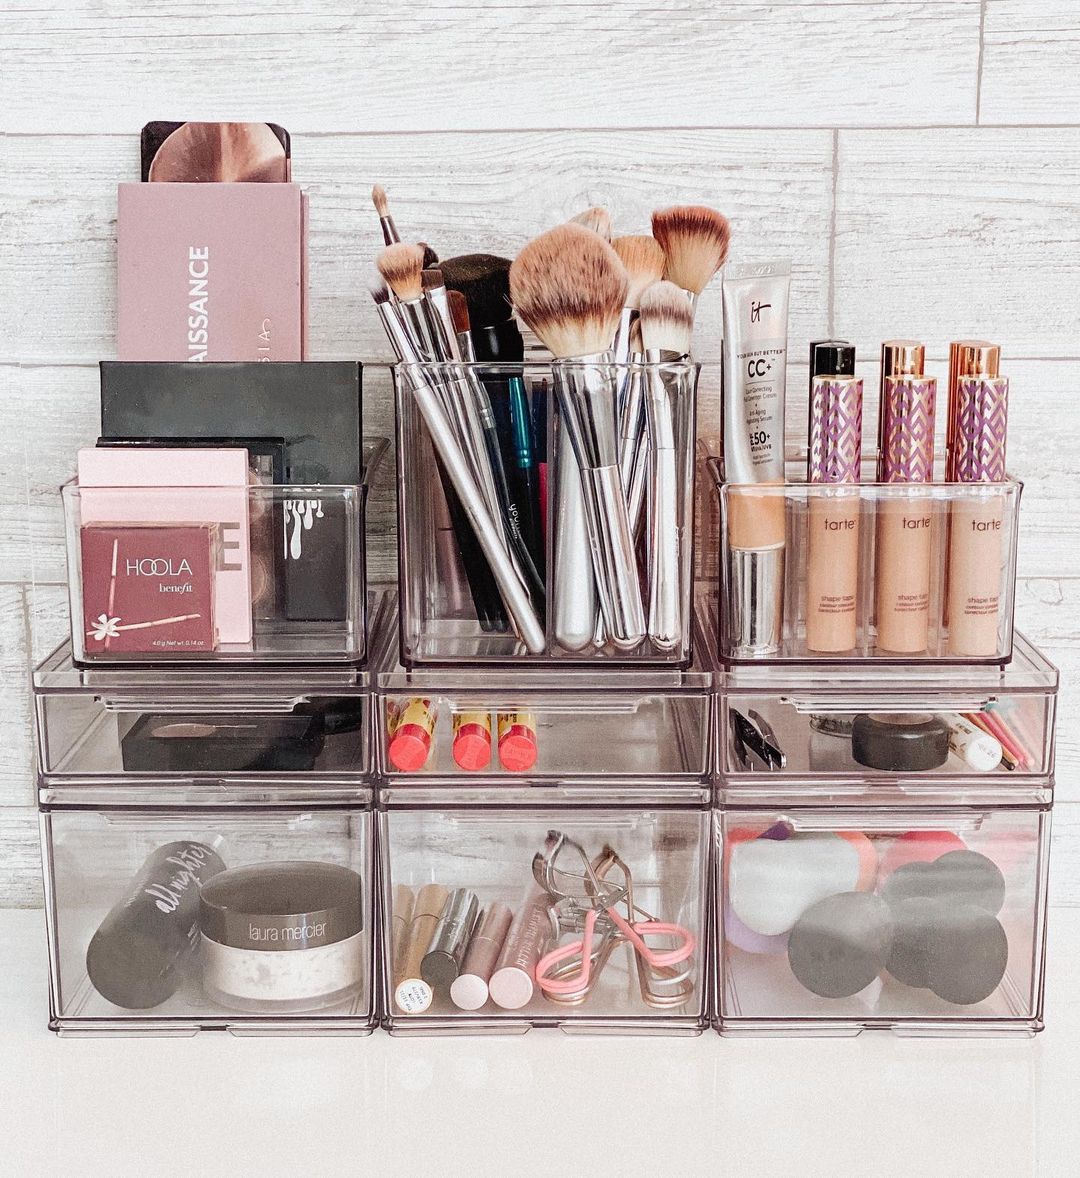 Makeup and makeup tools separated neatly in clear compartments. Photo by Instagram user @neatlyembellished.